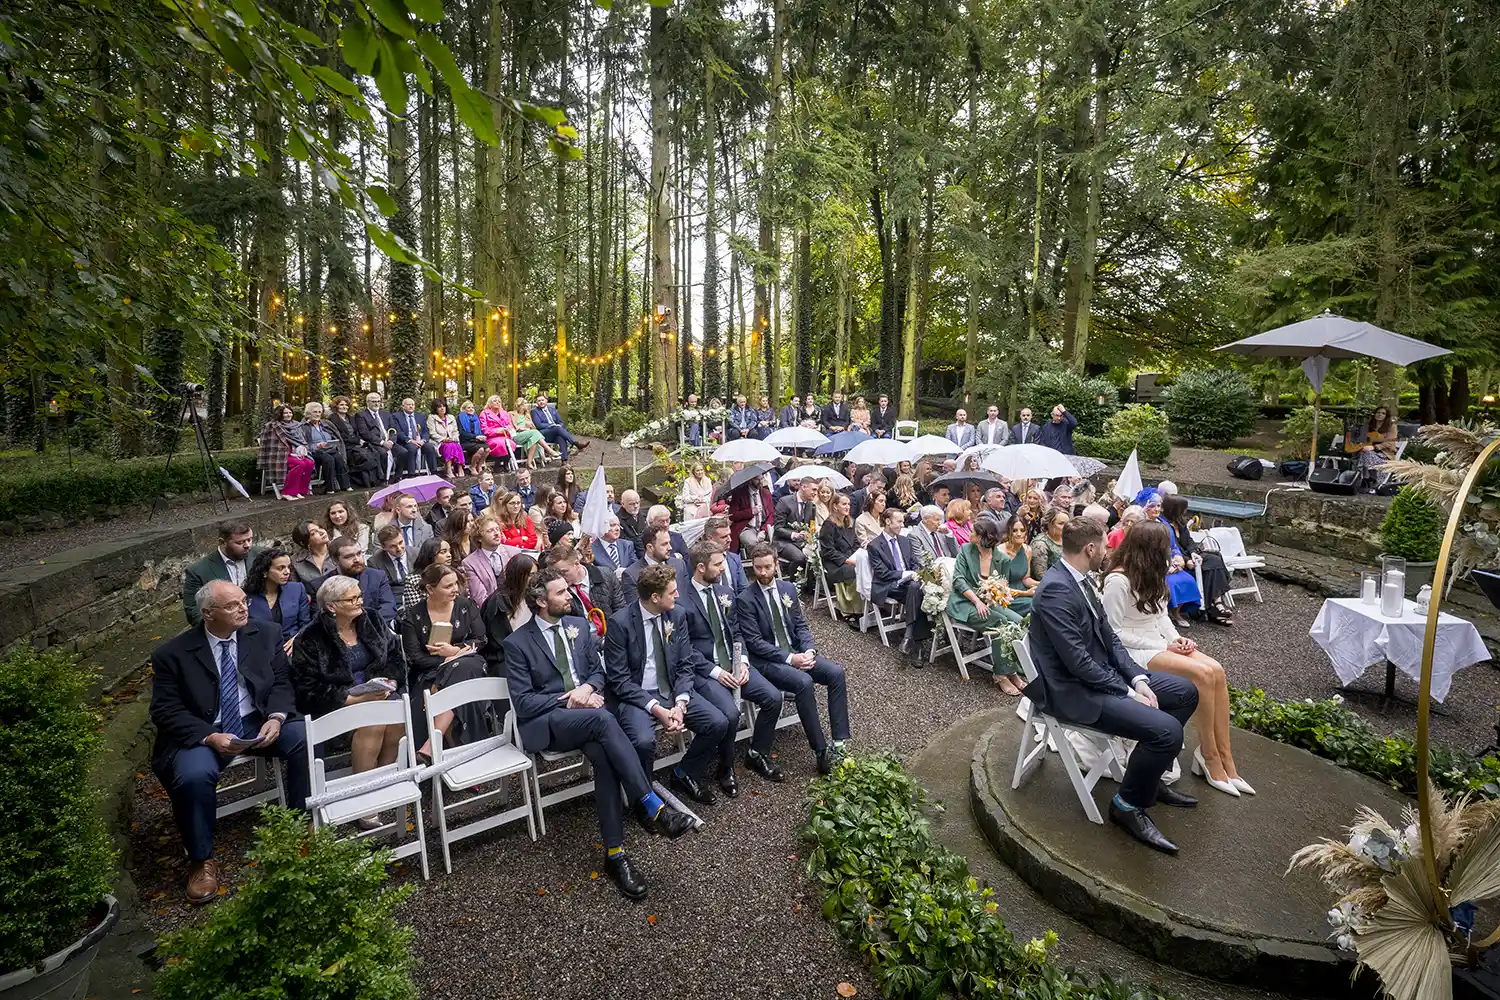 Outdoor wedding Ceremony at The Station House Hotel